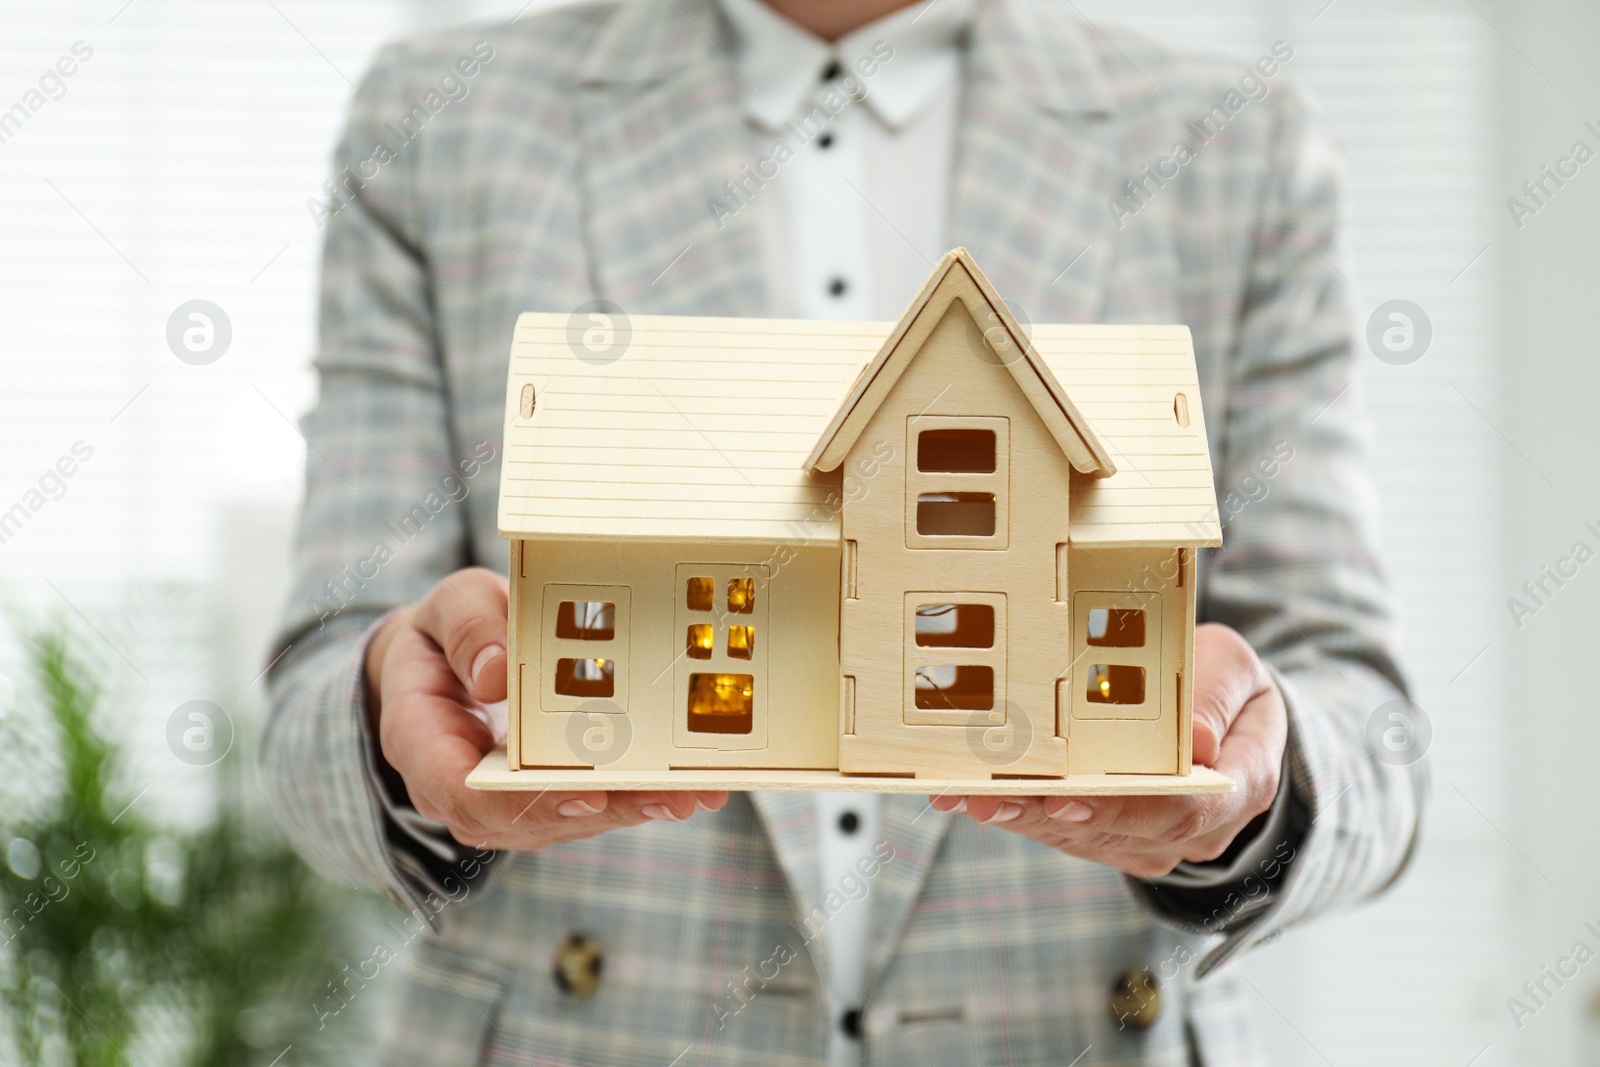 Photo of Real estate agent holding wooden house model with lights indoors, closeup